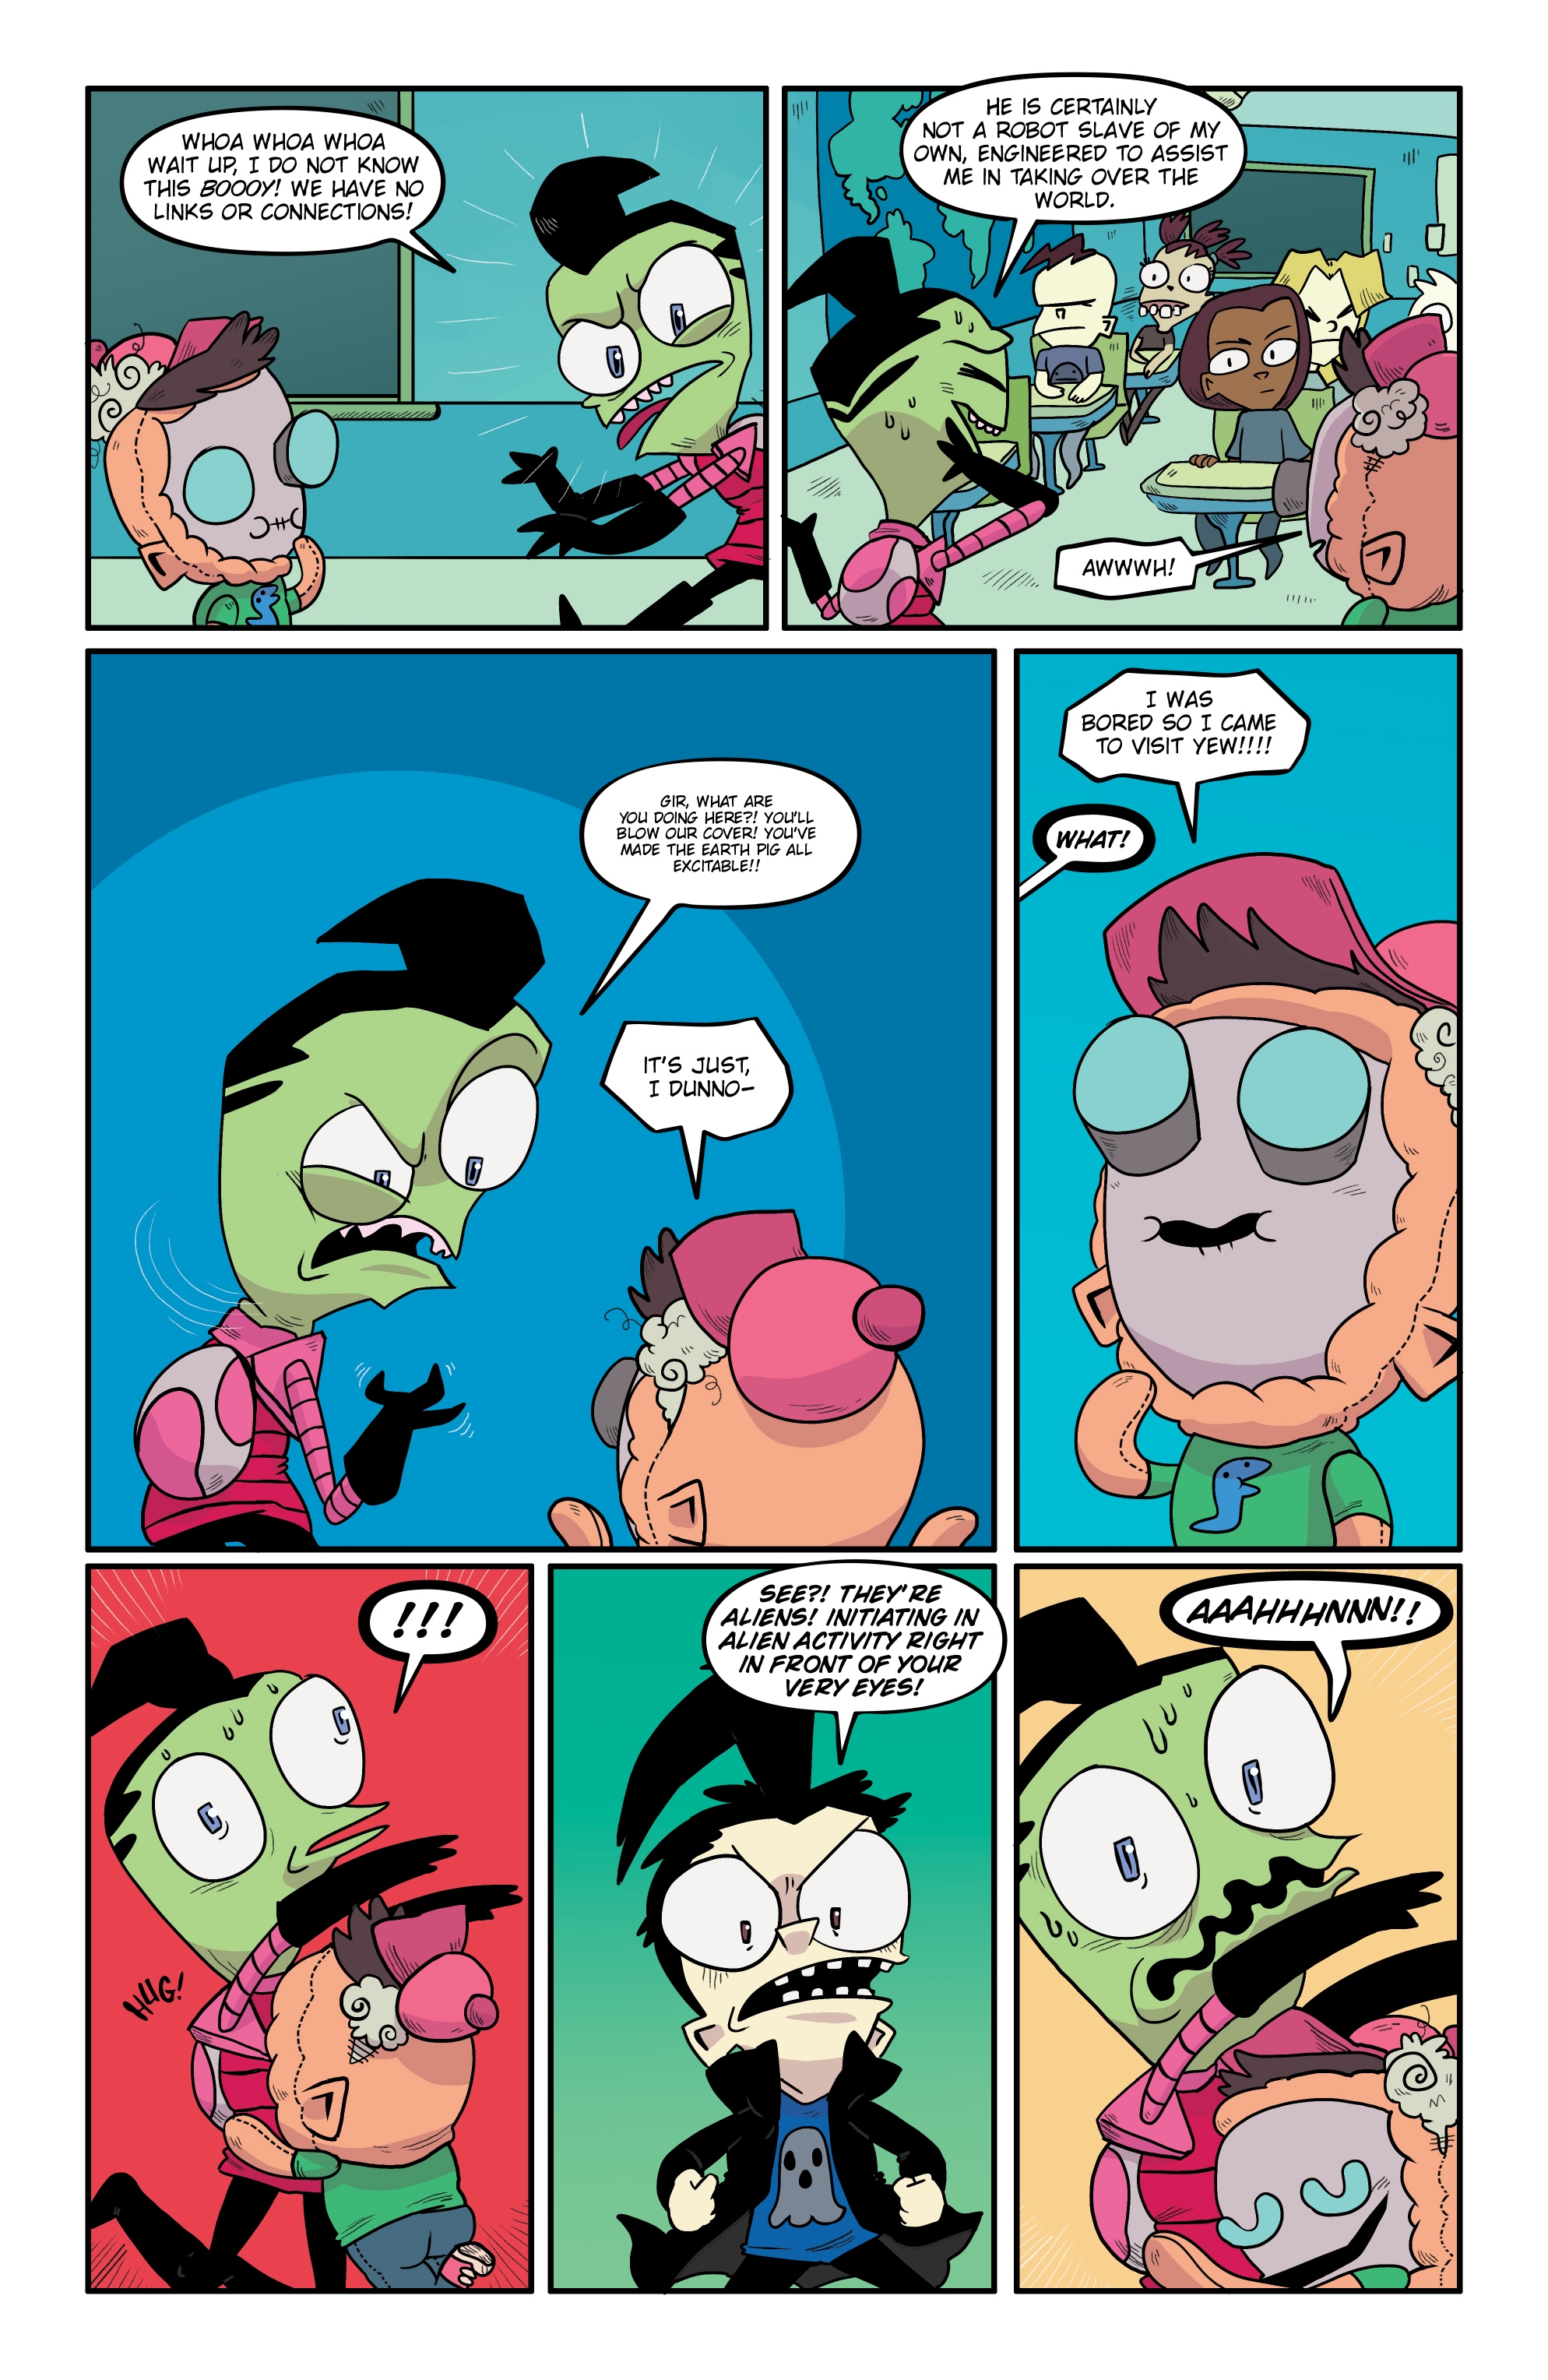 Invader Zim (2015-): Chapter 26 - Page 4